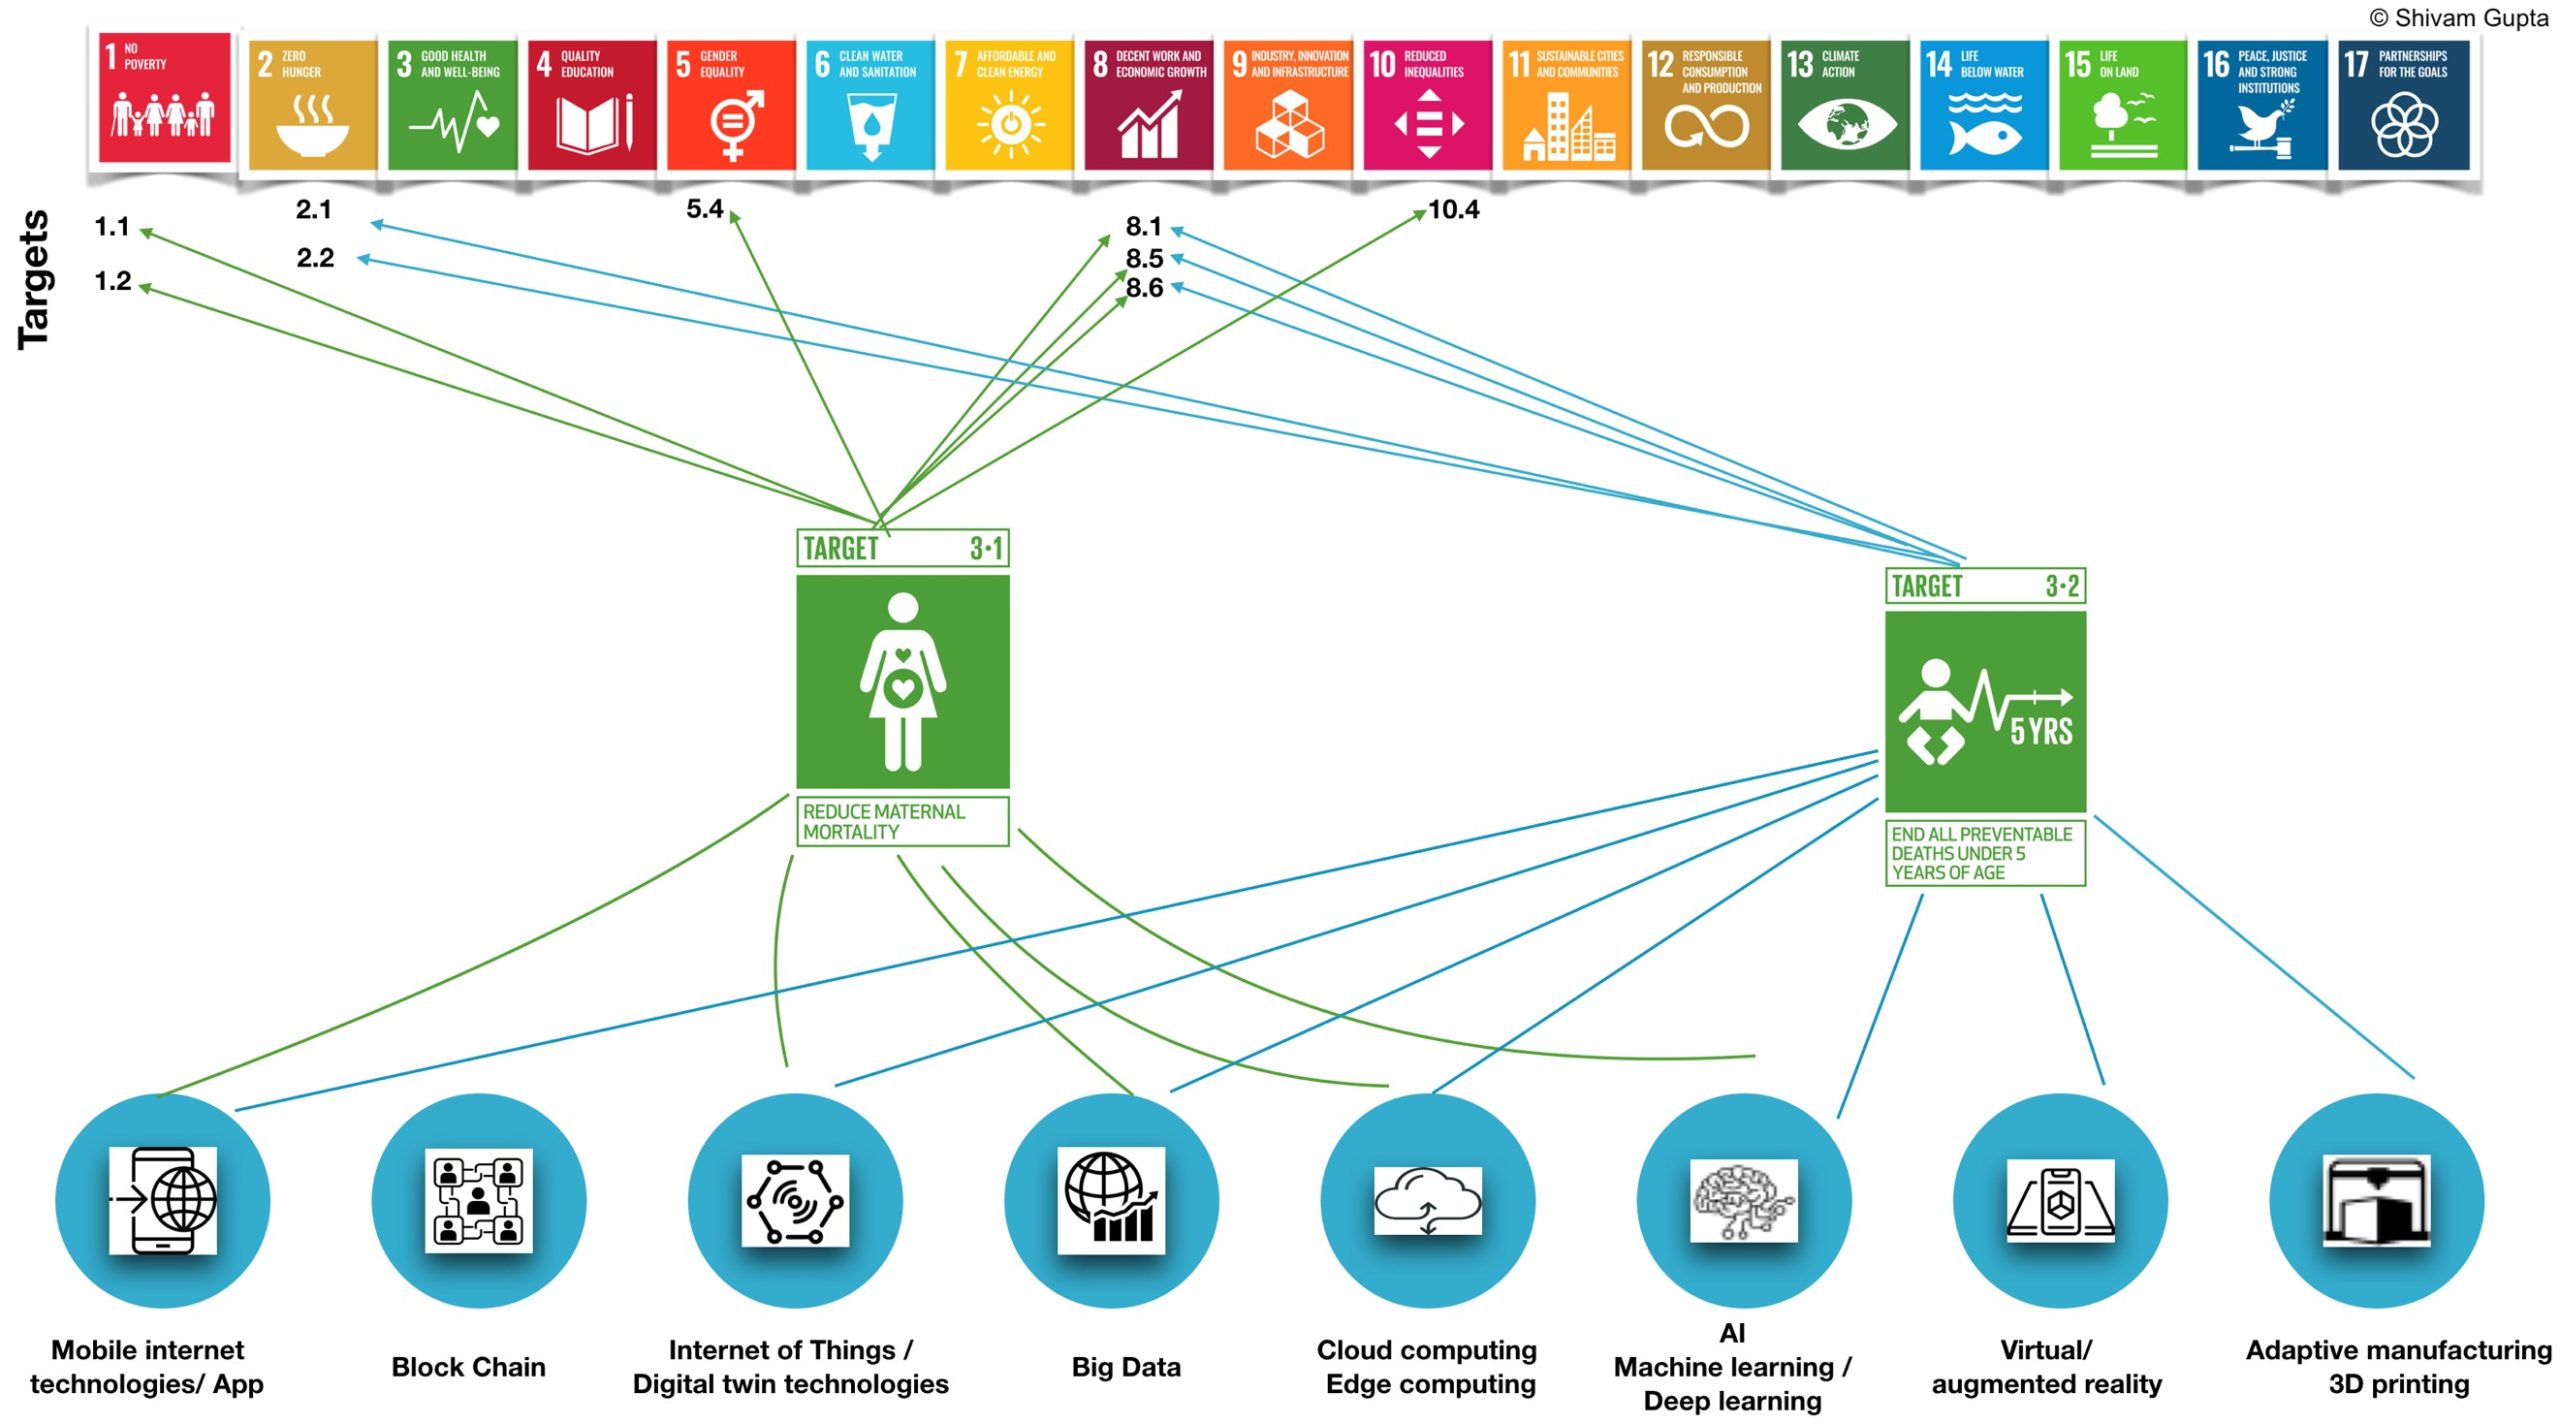 Figure 2: Interlinkages between SDG 3 target 3.1 and 3.2 with other SDG targets along with their interaction with eight D&AI capabilities